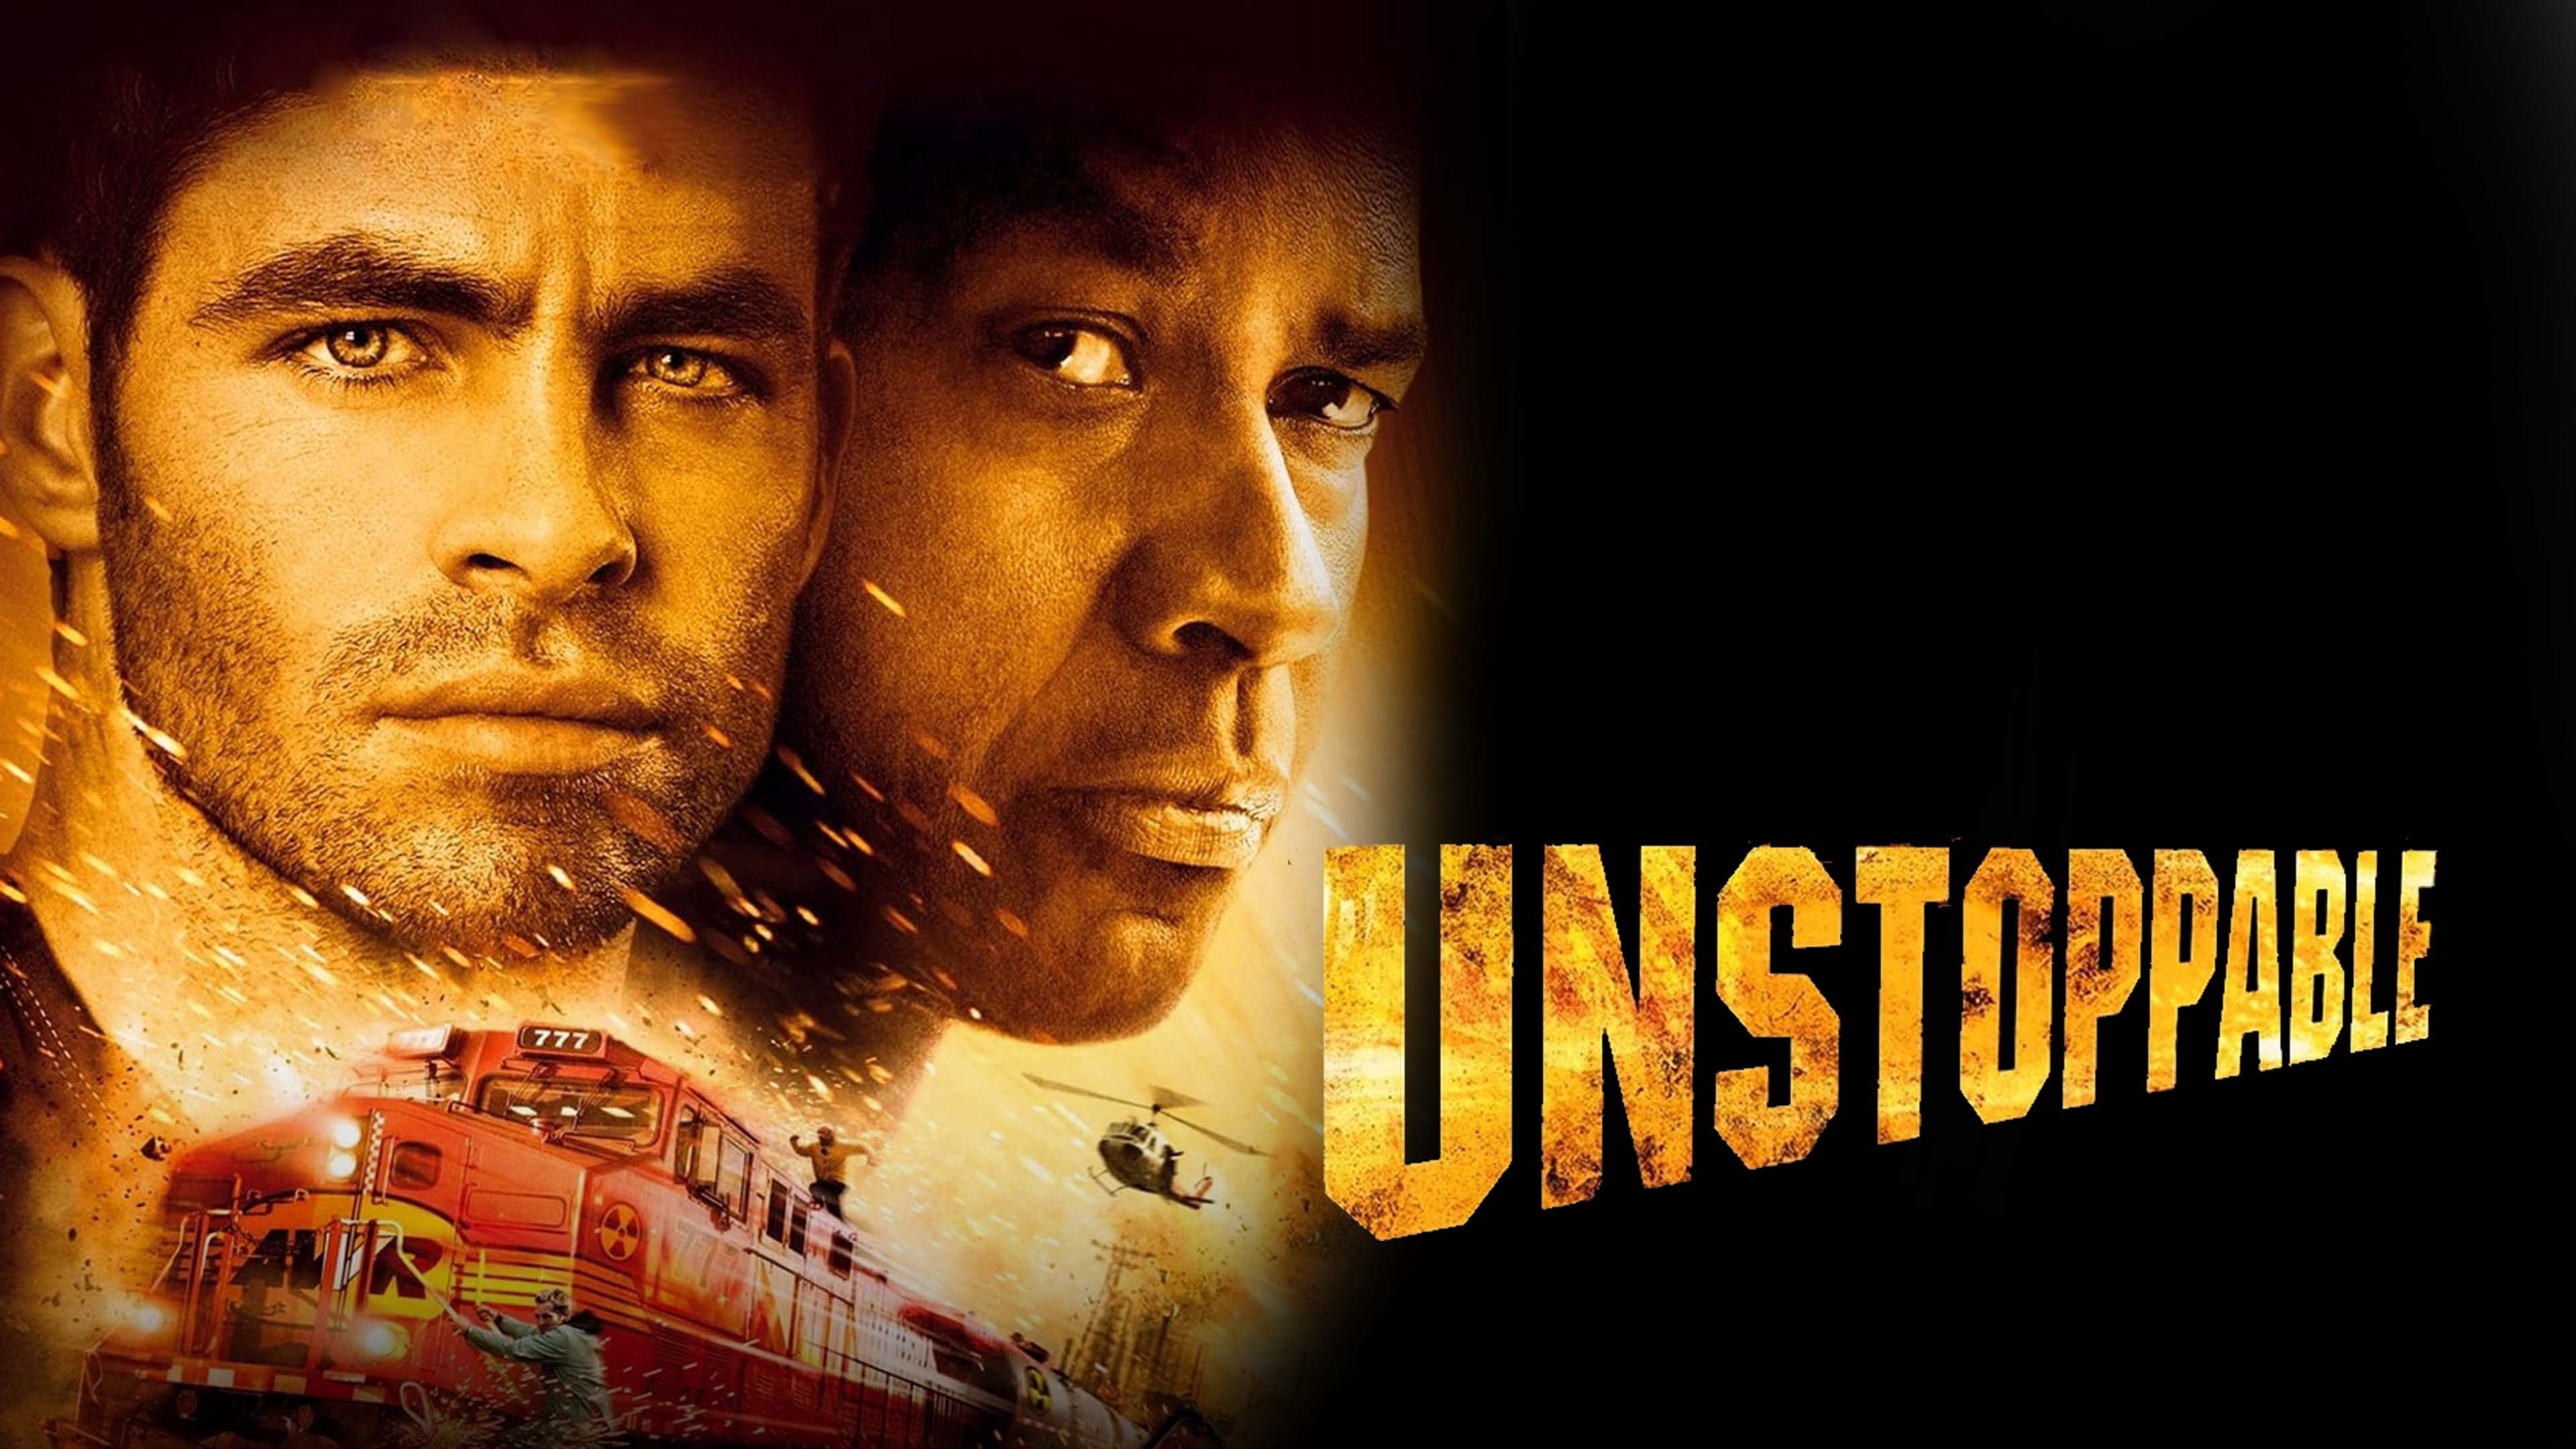 Watch Unstoppable Full HD TV Show Online | Airtel Xstream Play